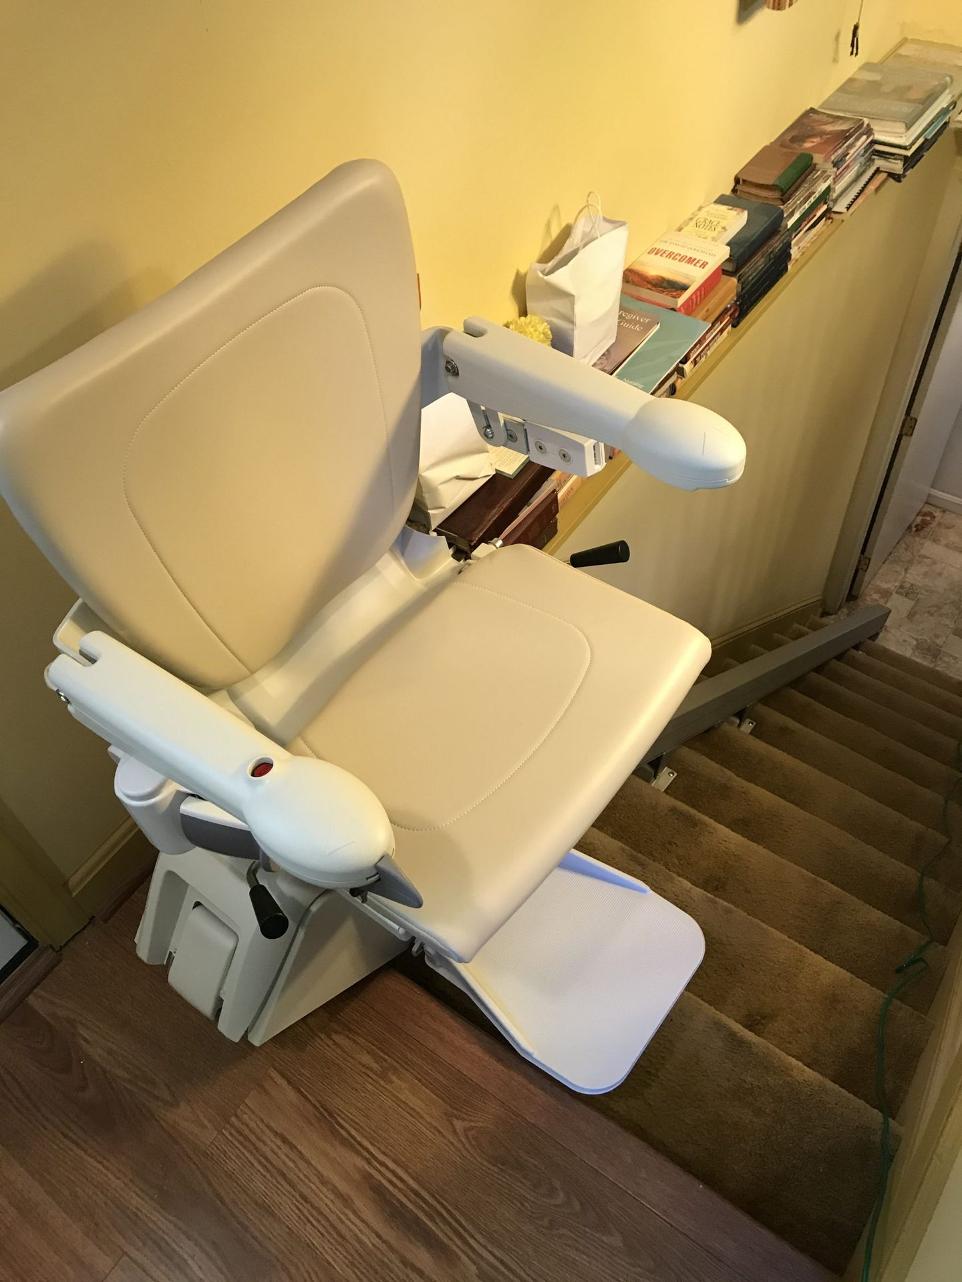 Straight stairlift at the top of the stairs